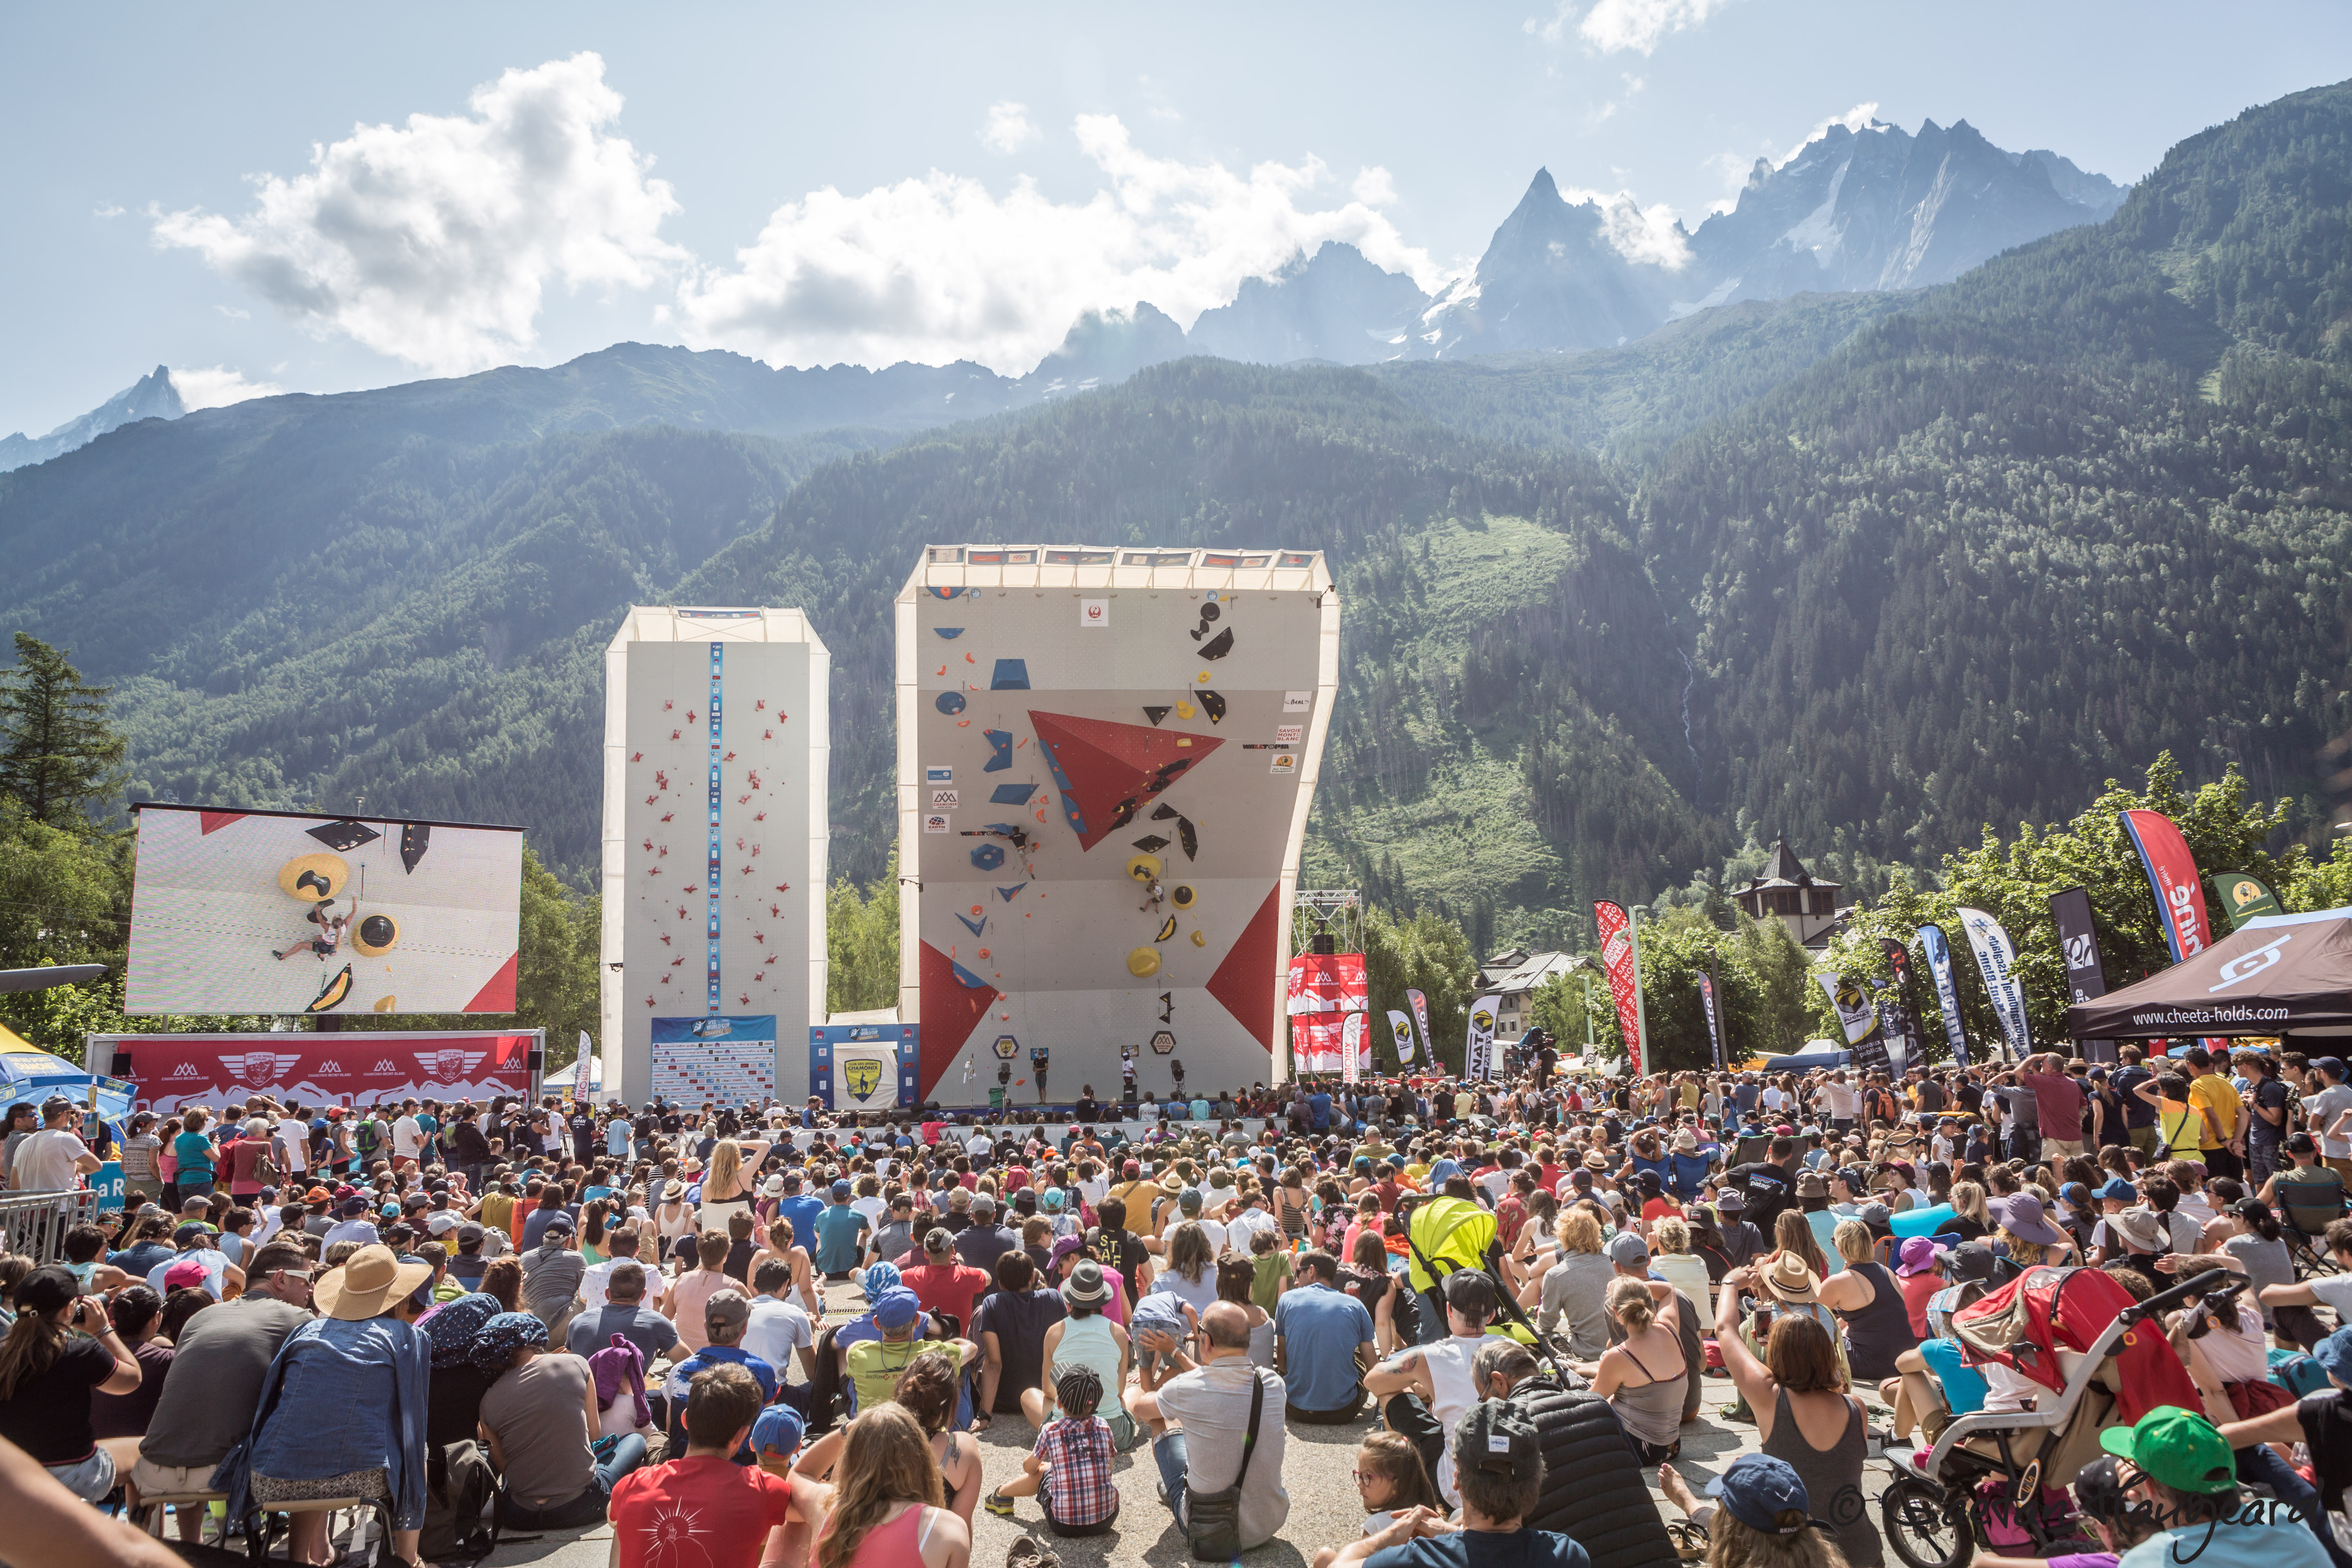 Back to free entry for the Climbing world cup !